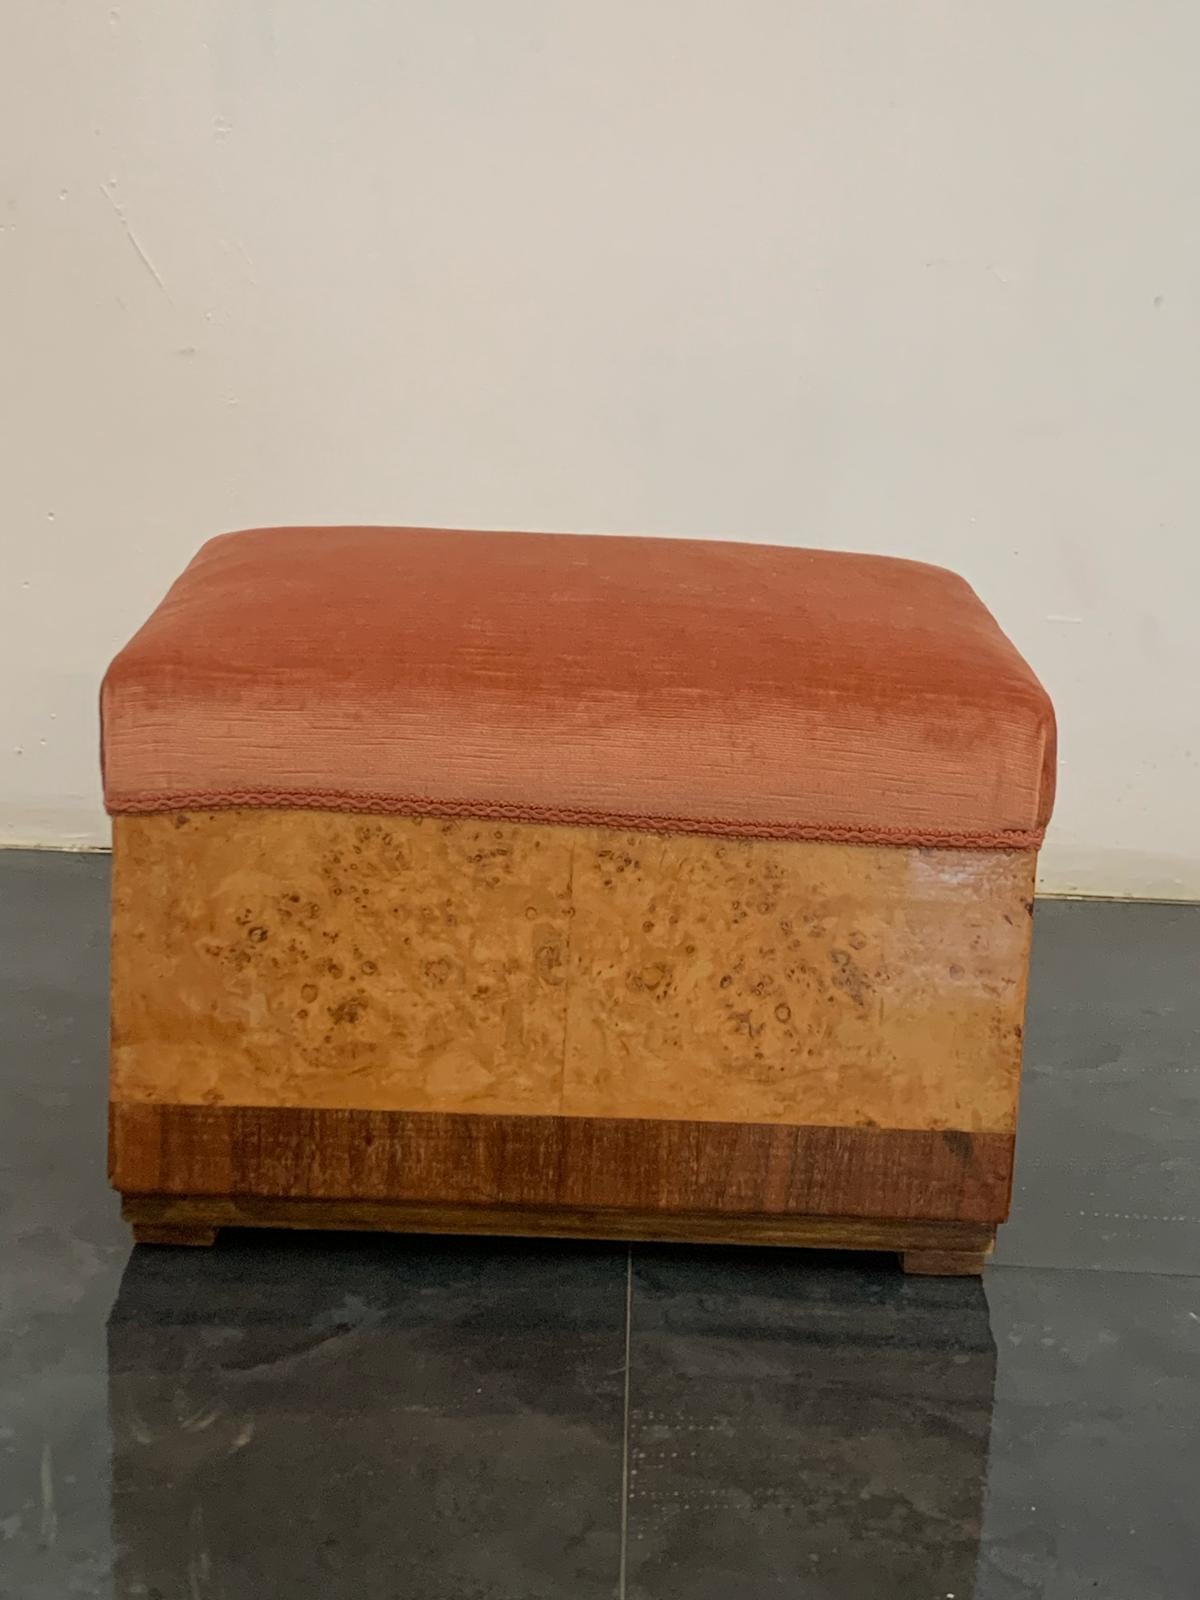 Pouf in walnut and thuia root. Light wear consistent with age and use. Solid and ready to use. Italian production, 1930s.
Packaging with bubble wrap and cardboard boxes is included. If the wooden packaging is needed (fumigated crates or boxes) for